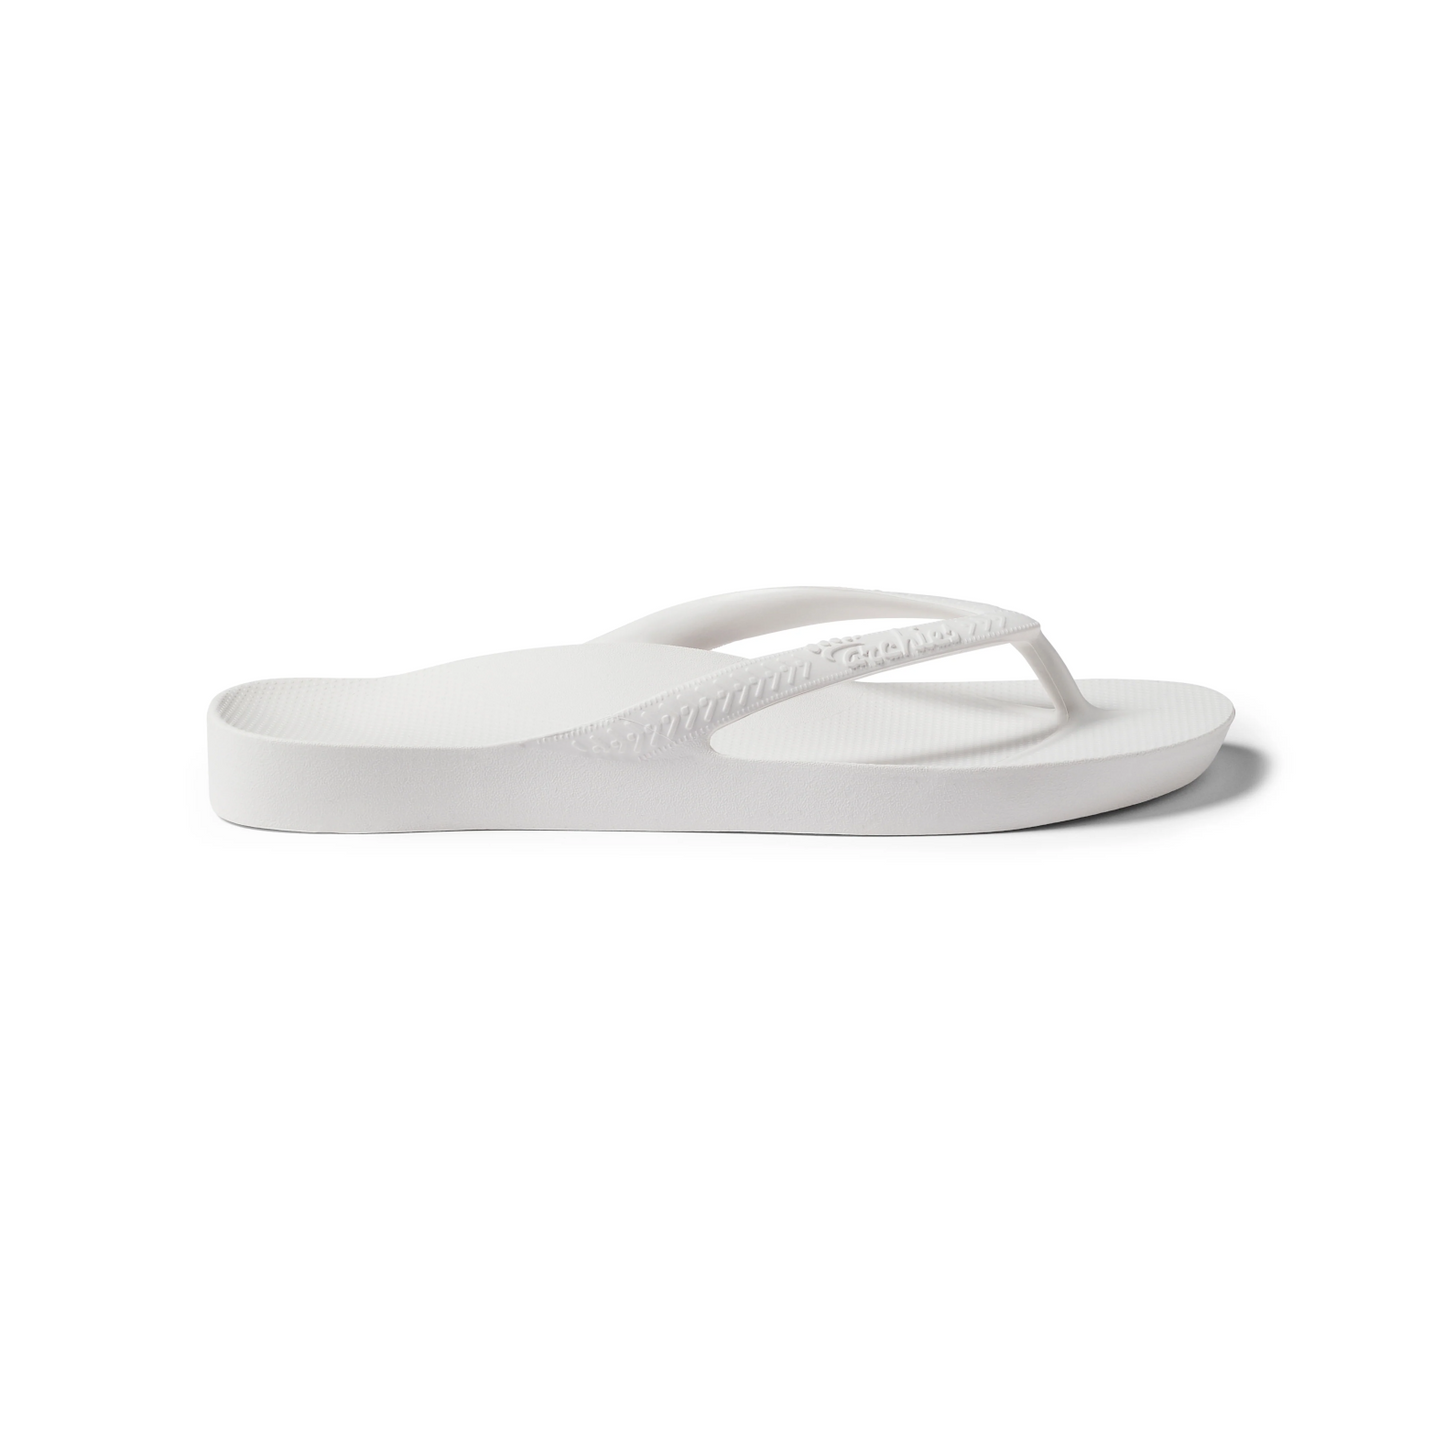 Arch Support Jandals White